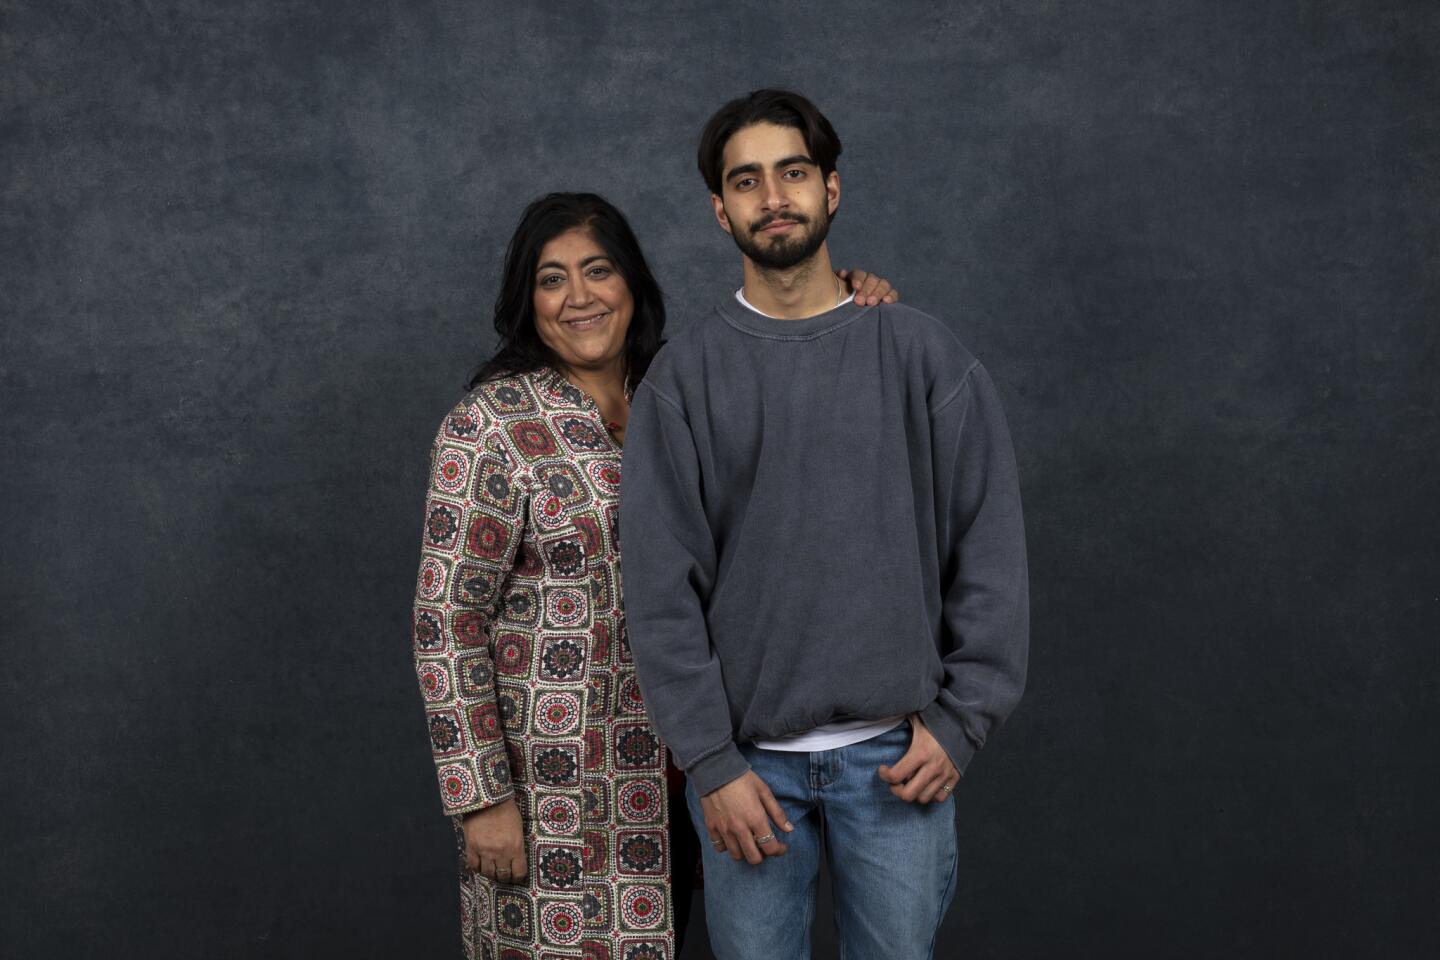 Director/writer/producer Gurinder Chadha, left, and actor Amer Chadha-Patel from "Blinded by the Light."